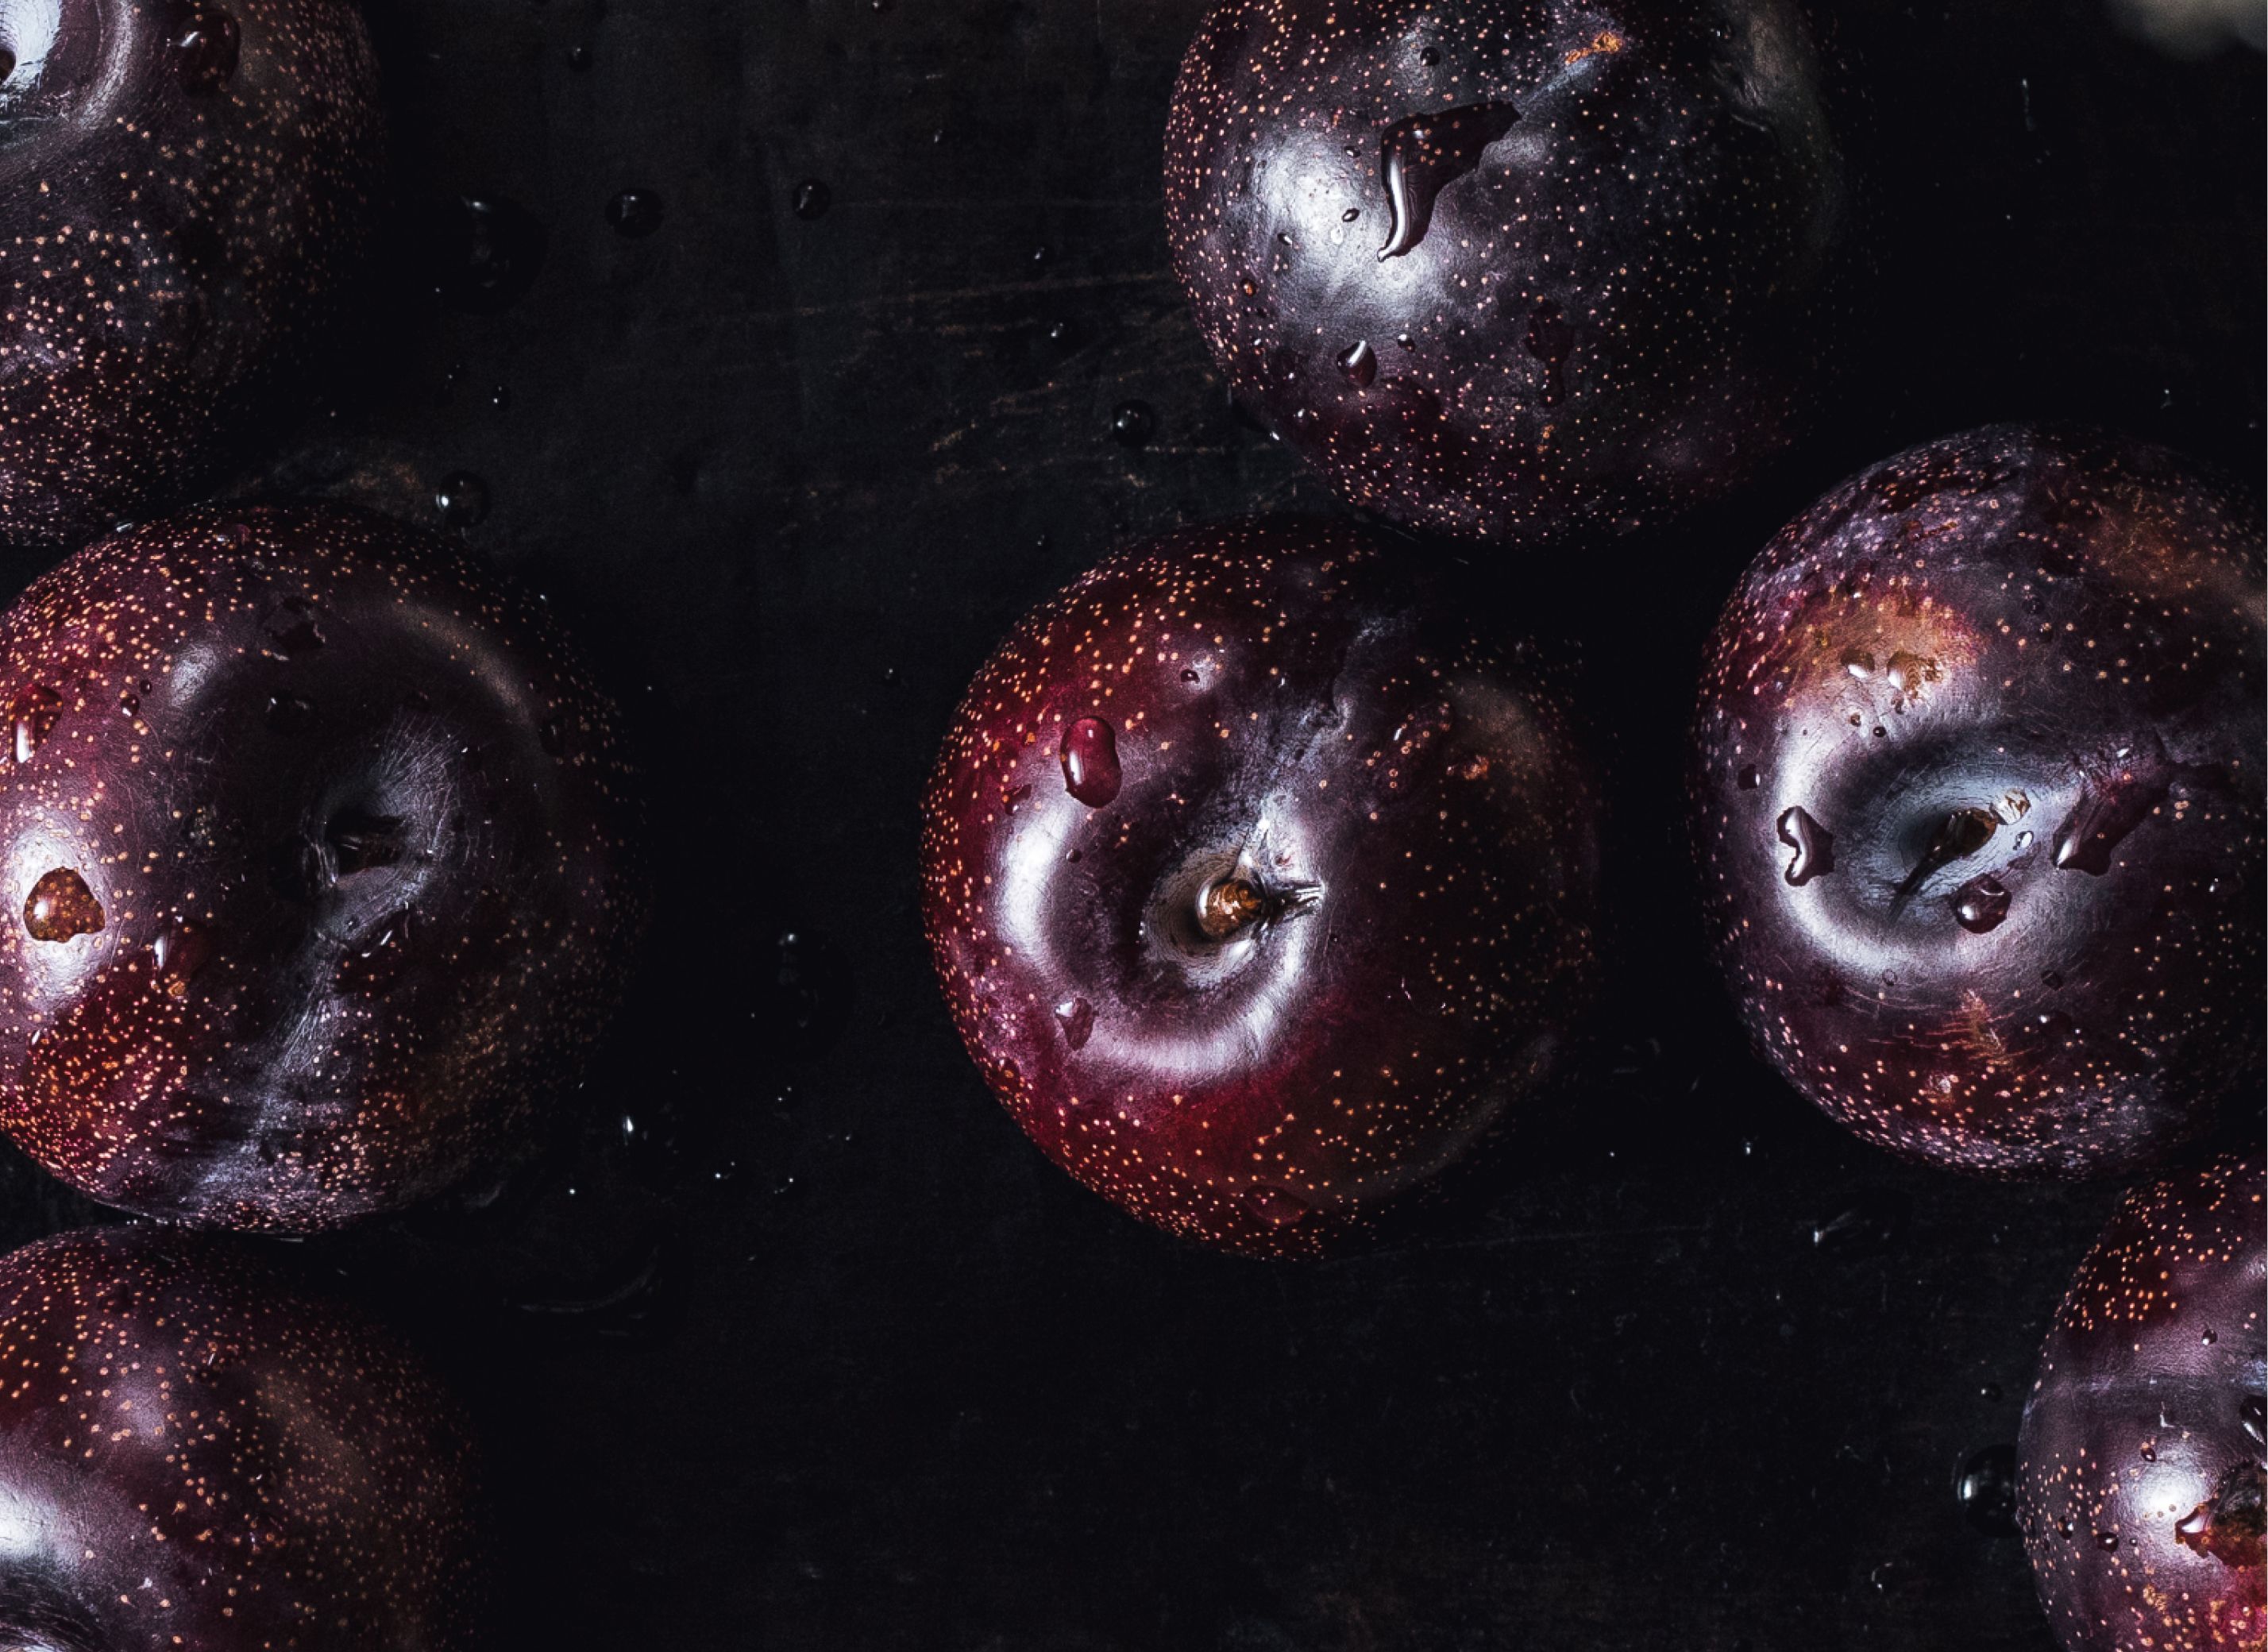 A bundle of Queen Garnet Plums laid together, glistening with fresh water droplets